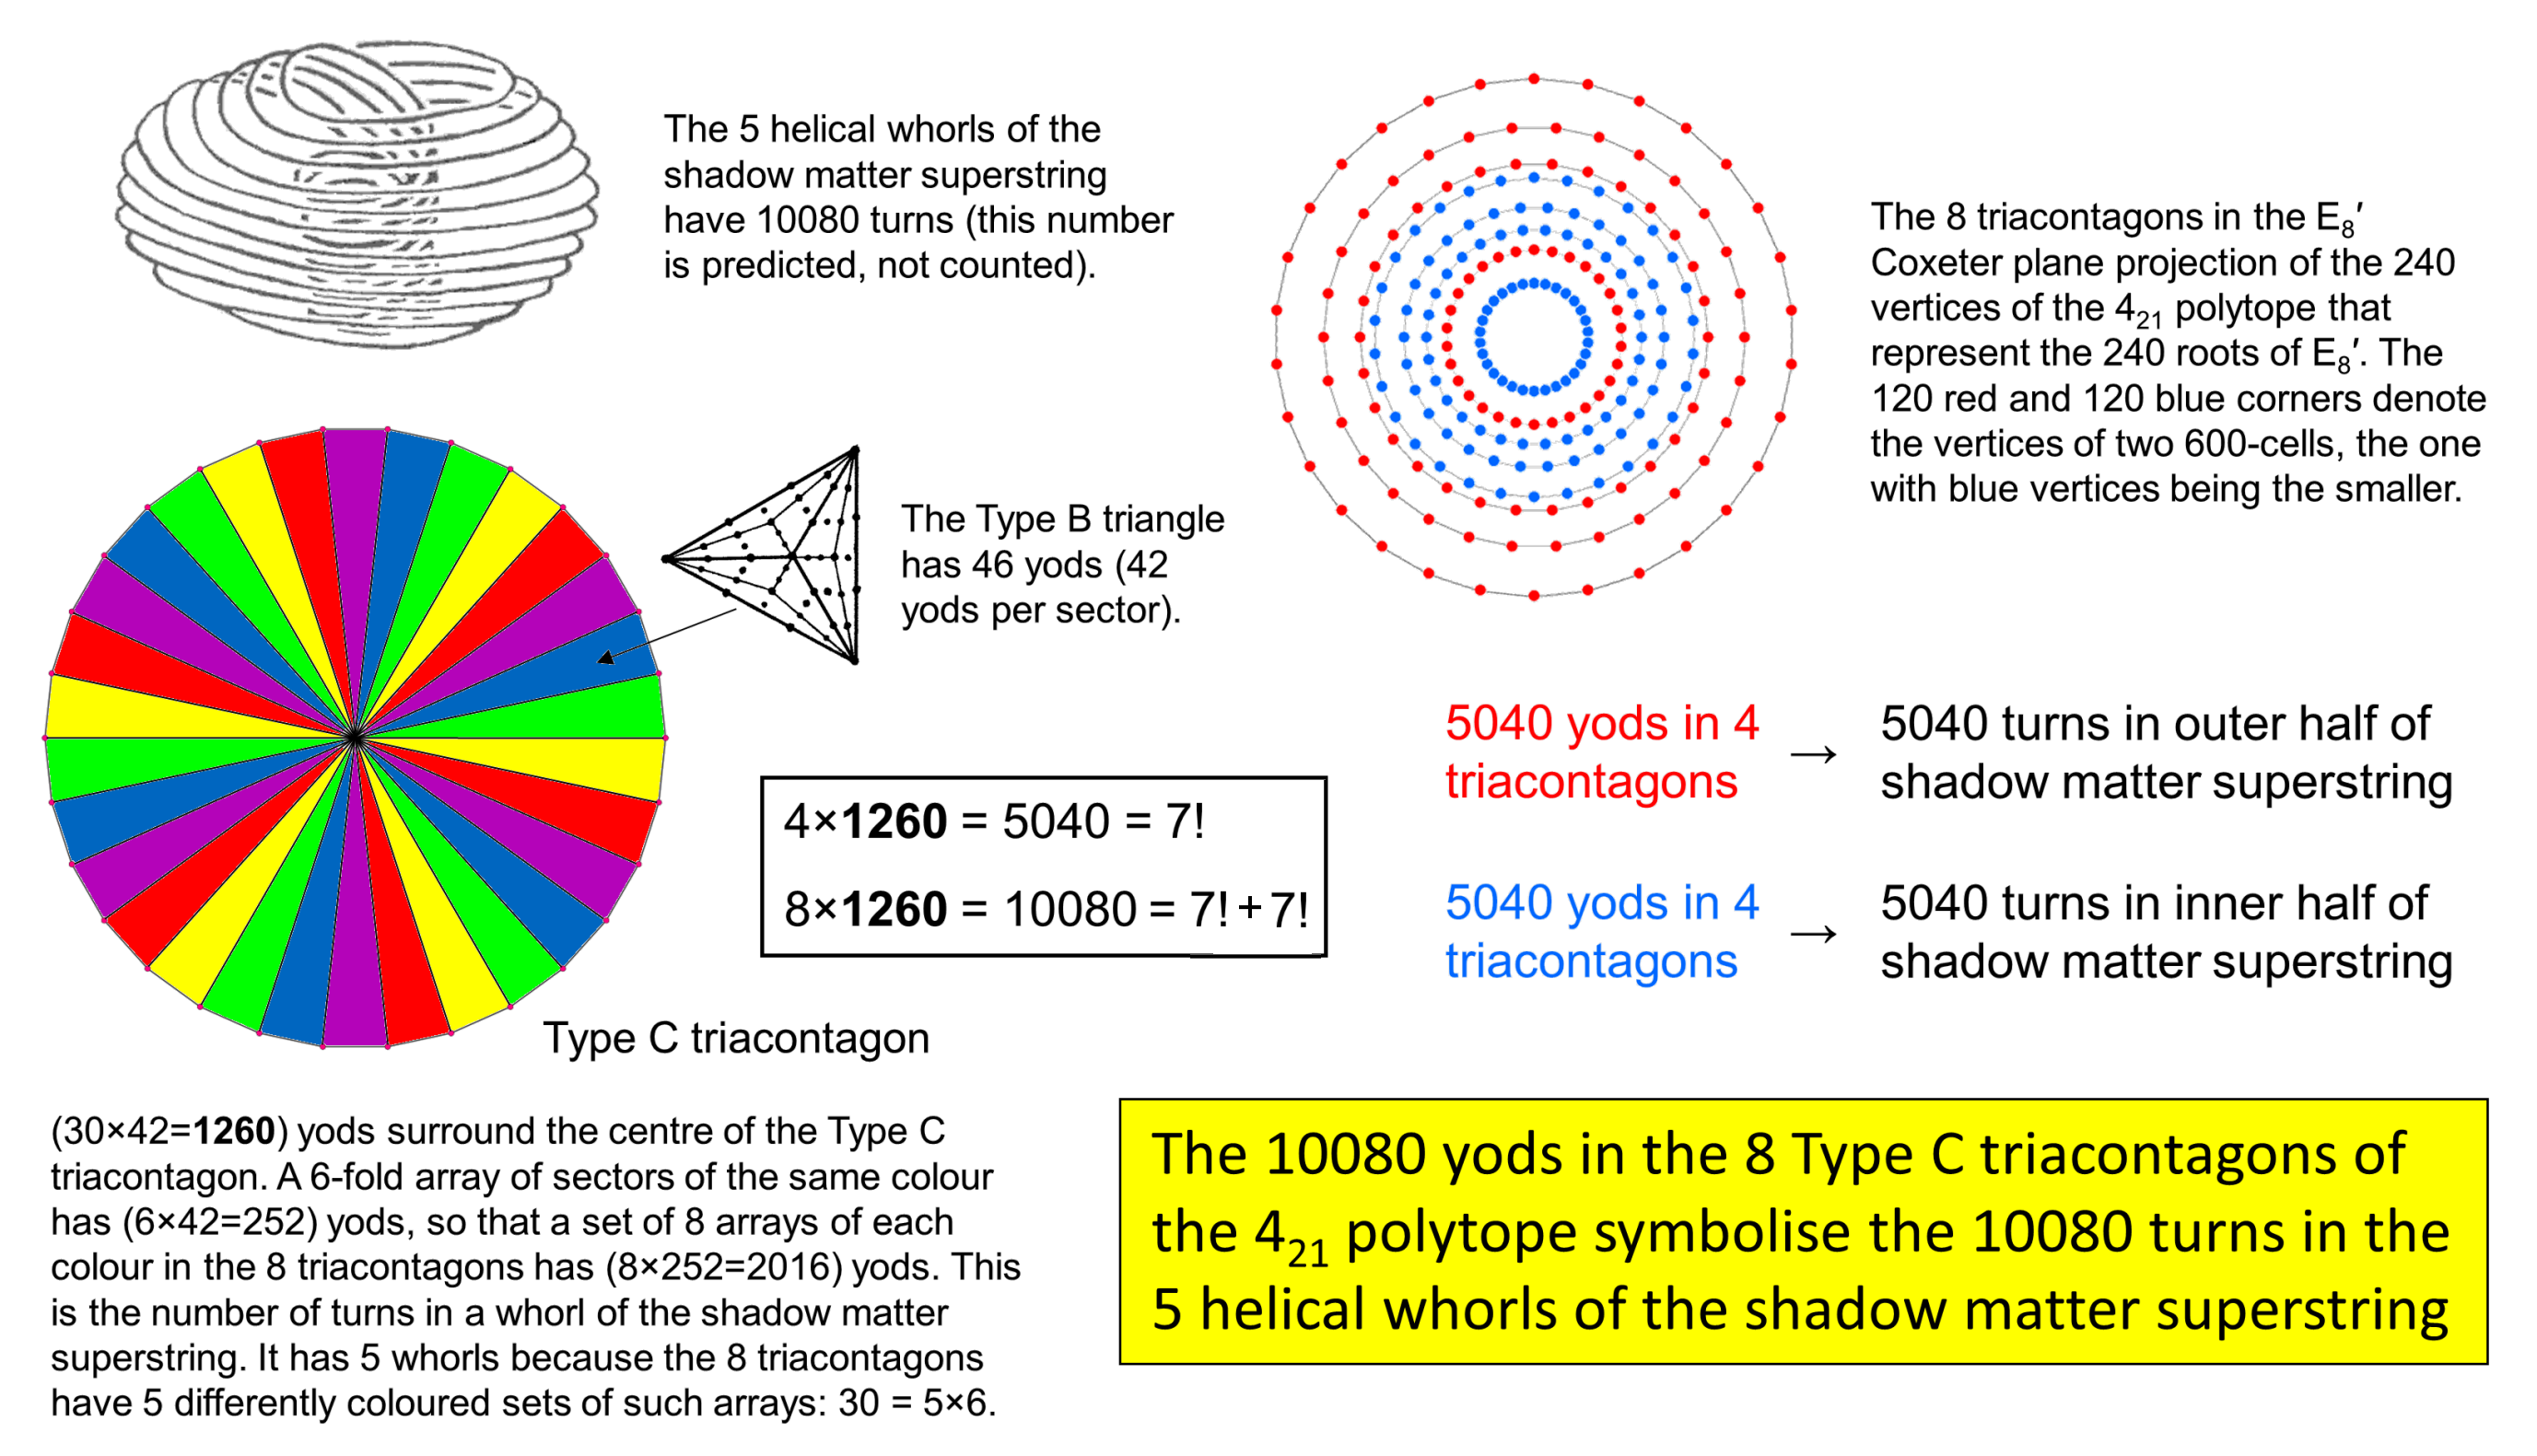 10080 yods in 8 Type C triacontagons symbolise 10080 tirns in whorls of shadow matter superstring